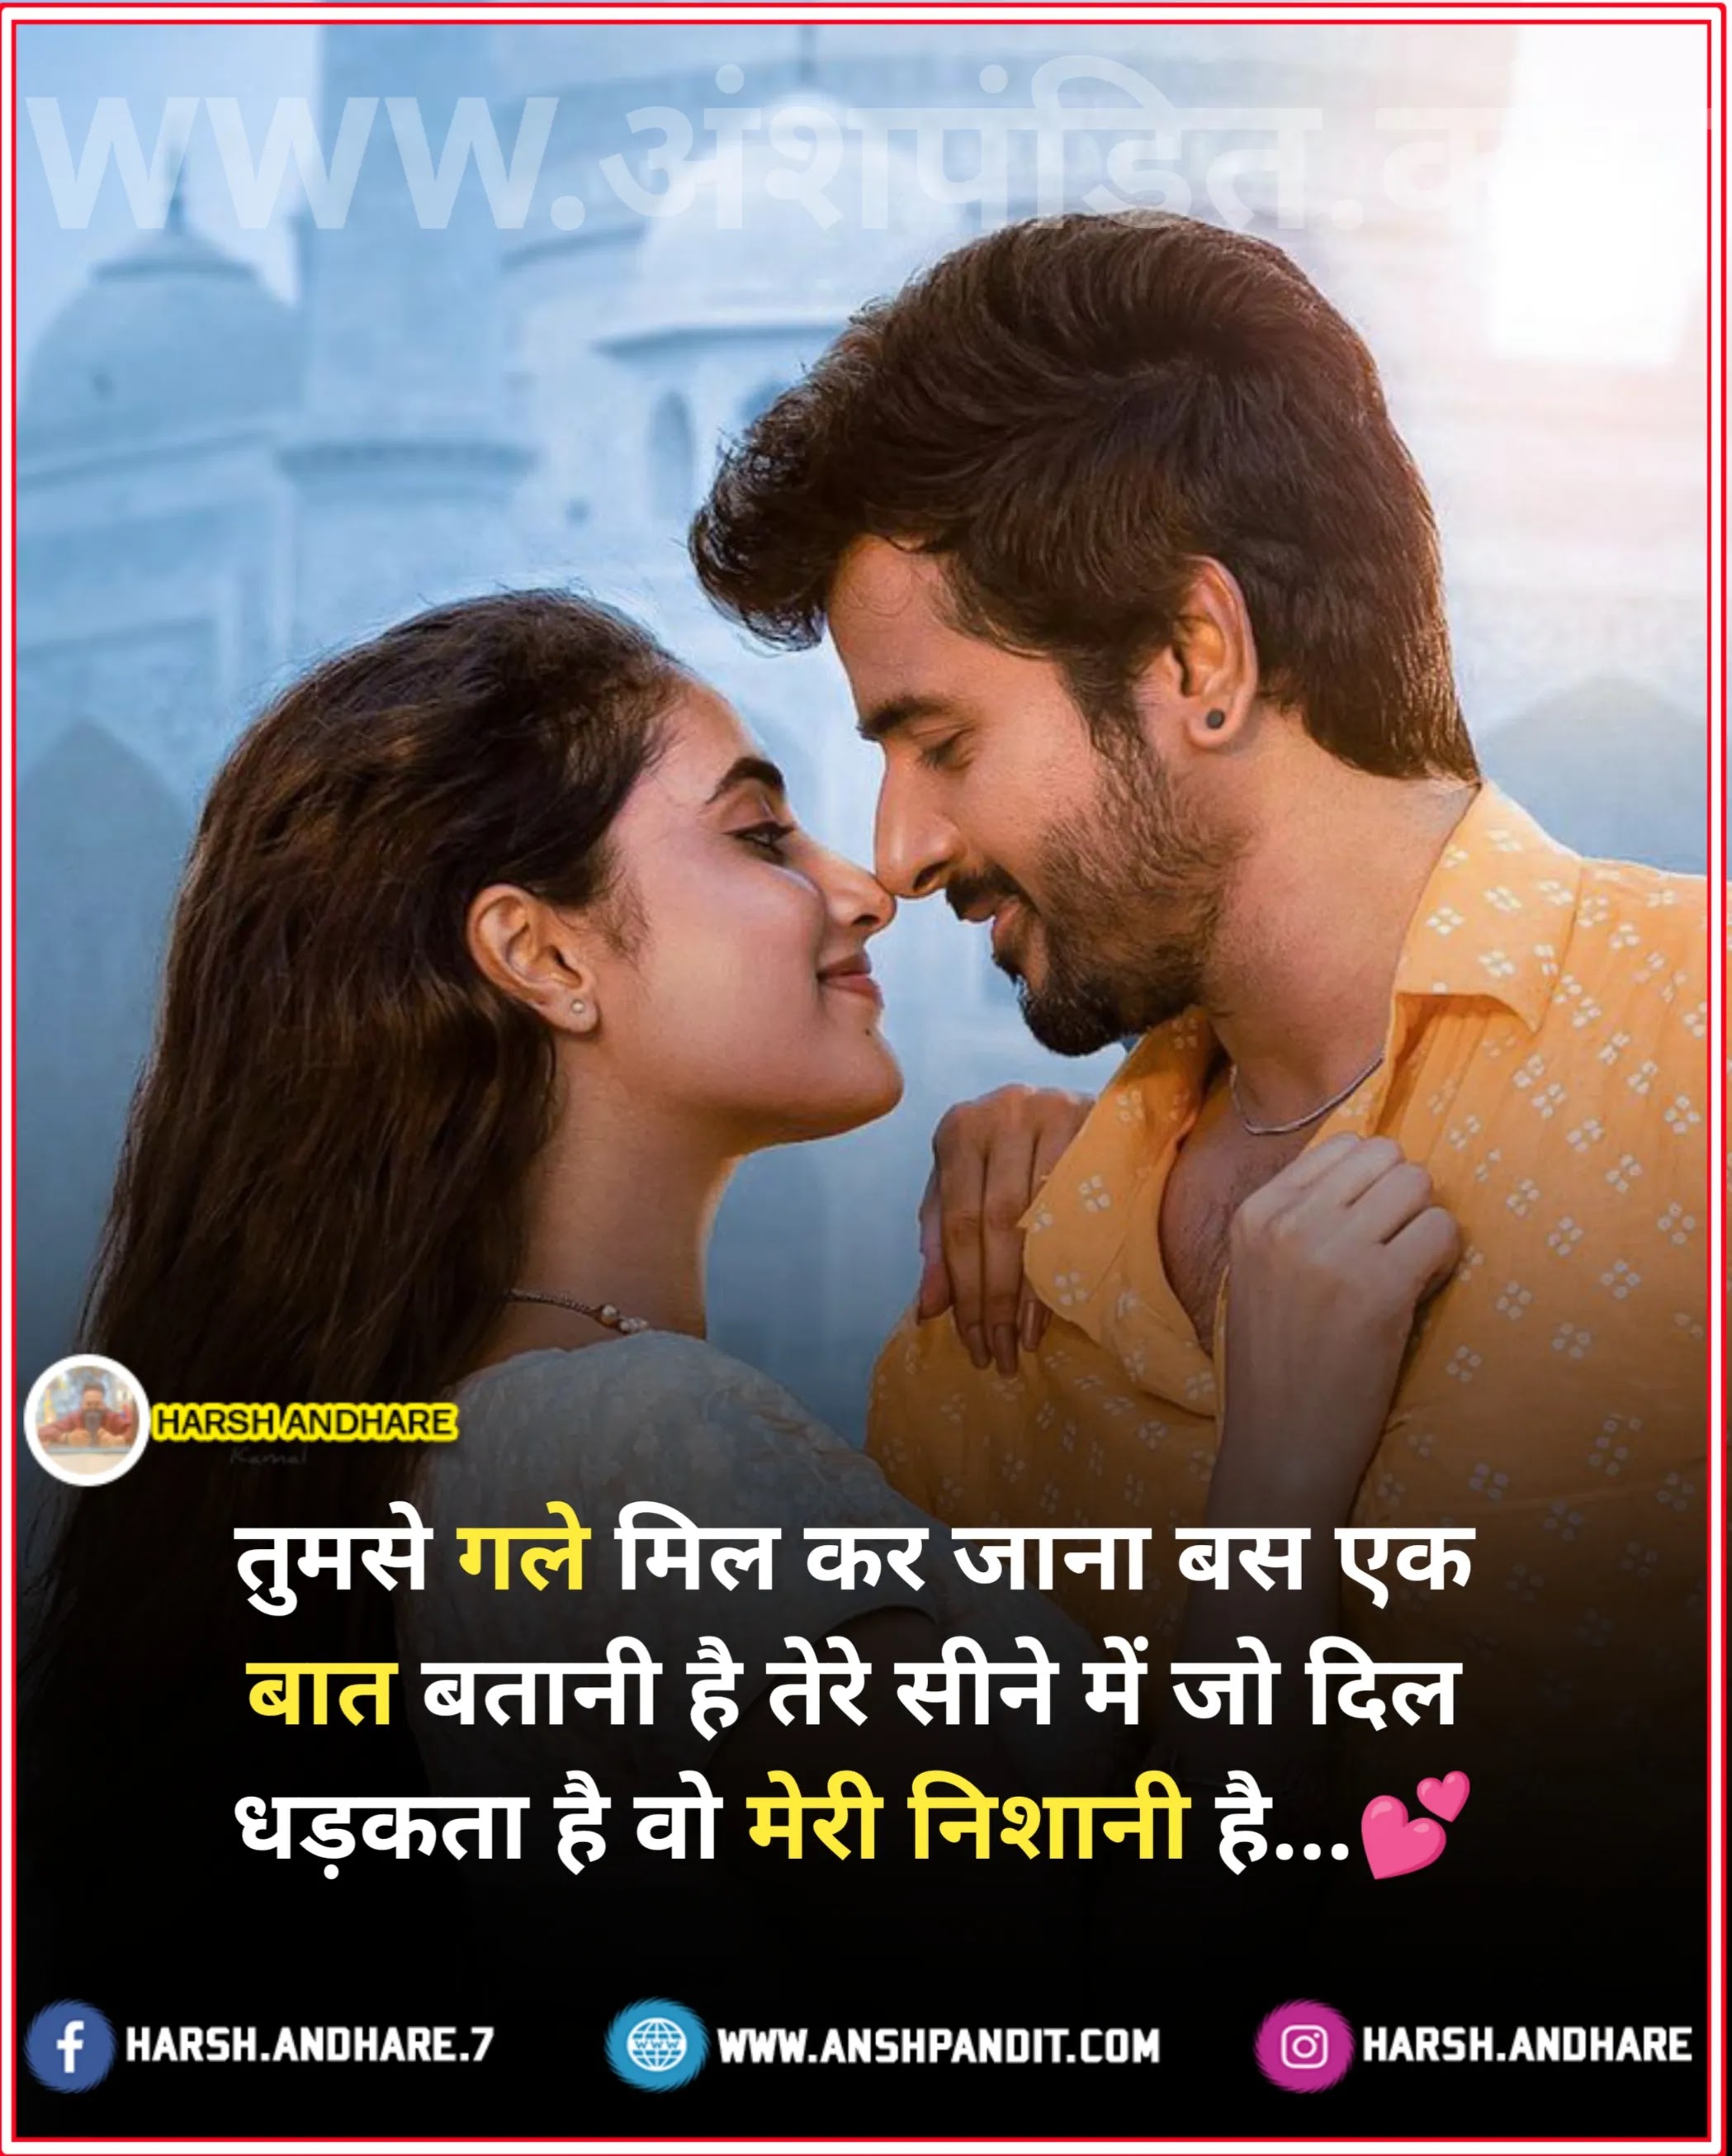 Husband and Wife Relationship Quotes in Hindi